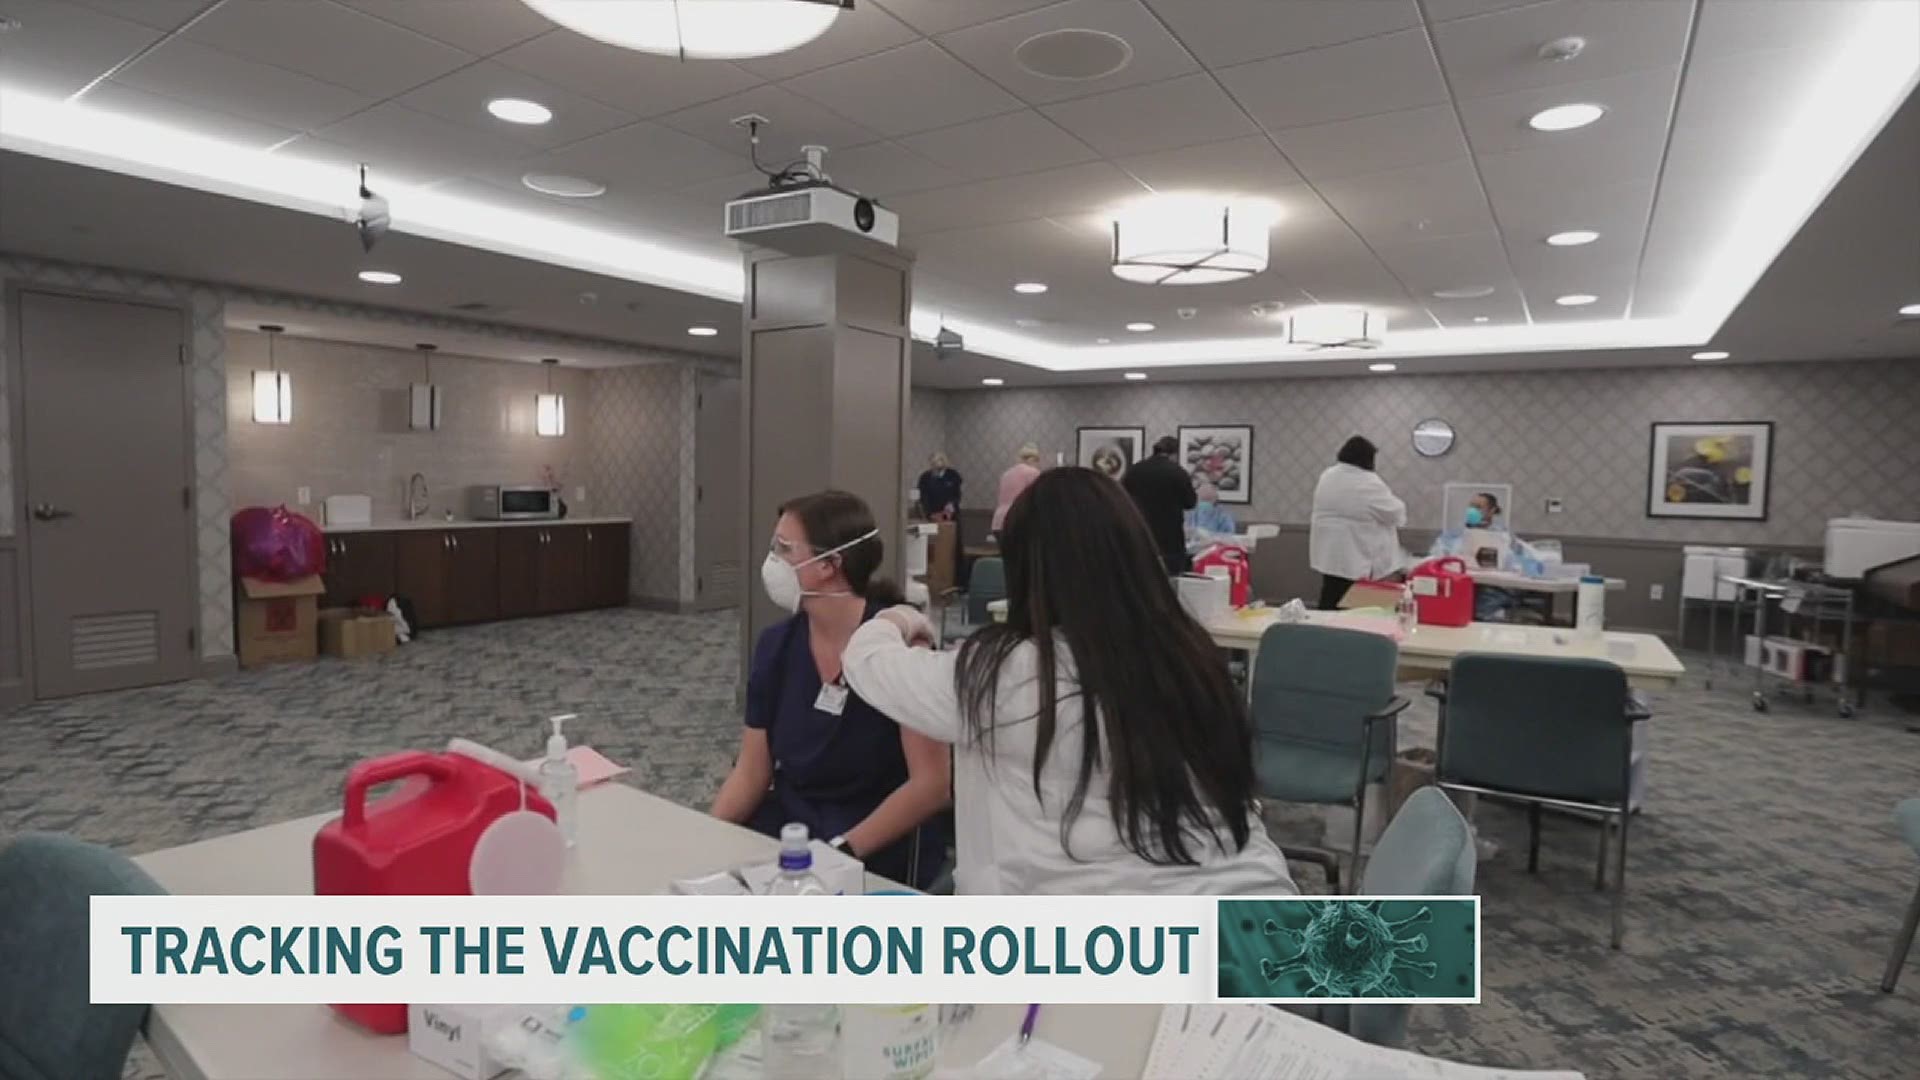 "We're going to need to start mass vaccination clinics we're going to need that money to actually contract with health care workers to be able to do that."